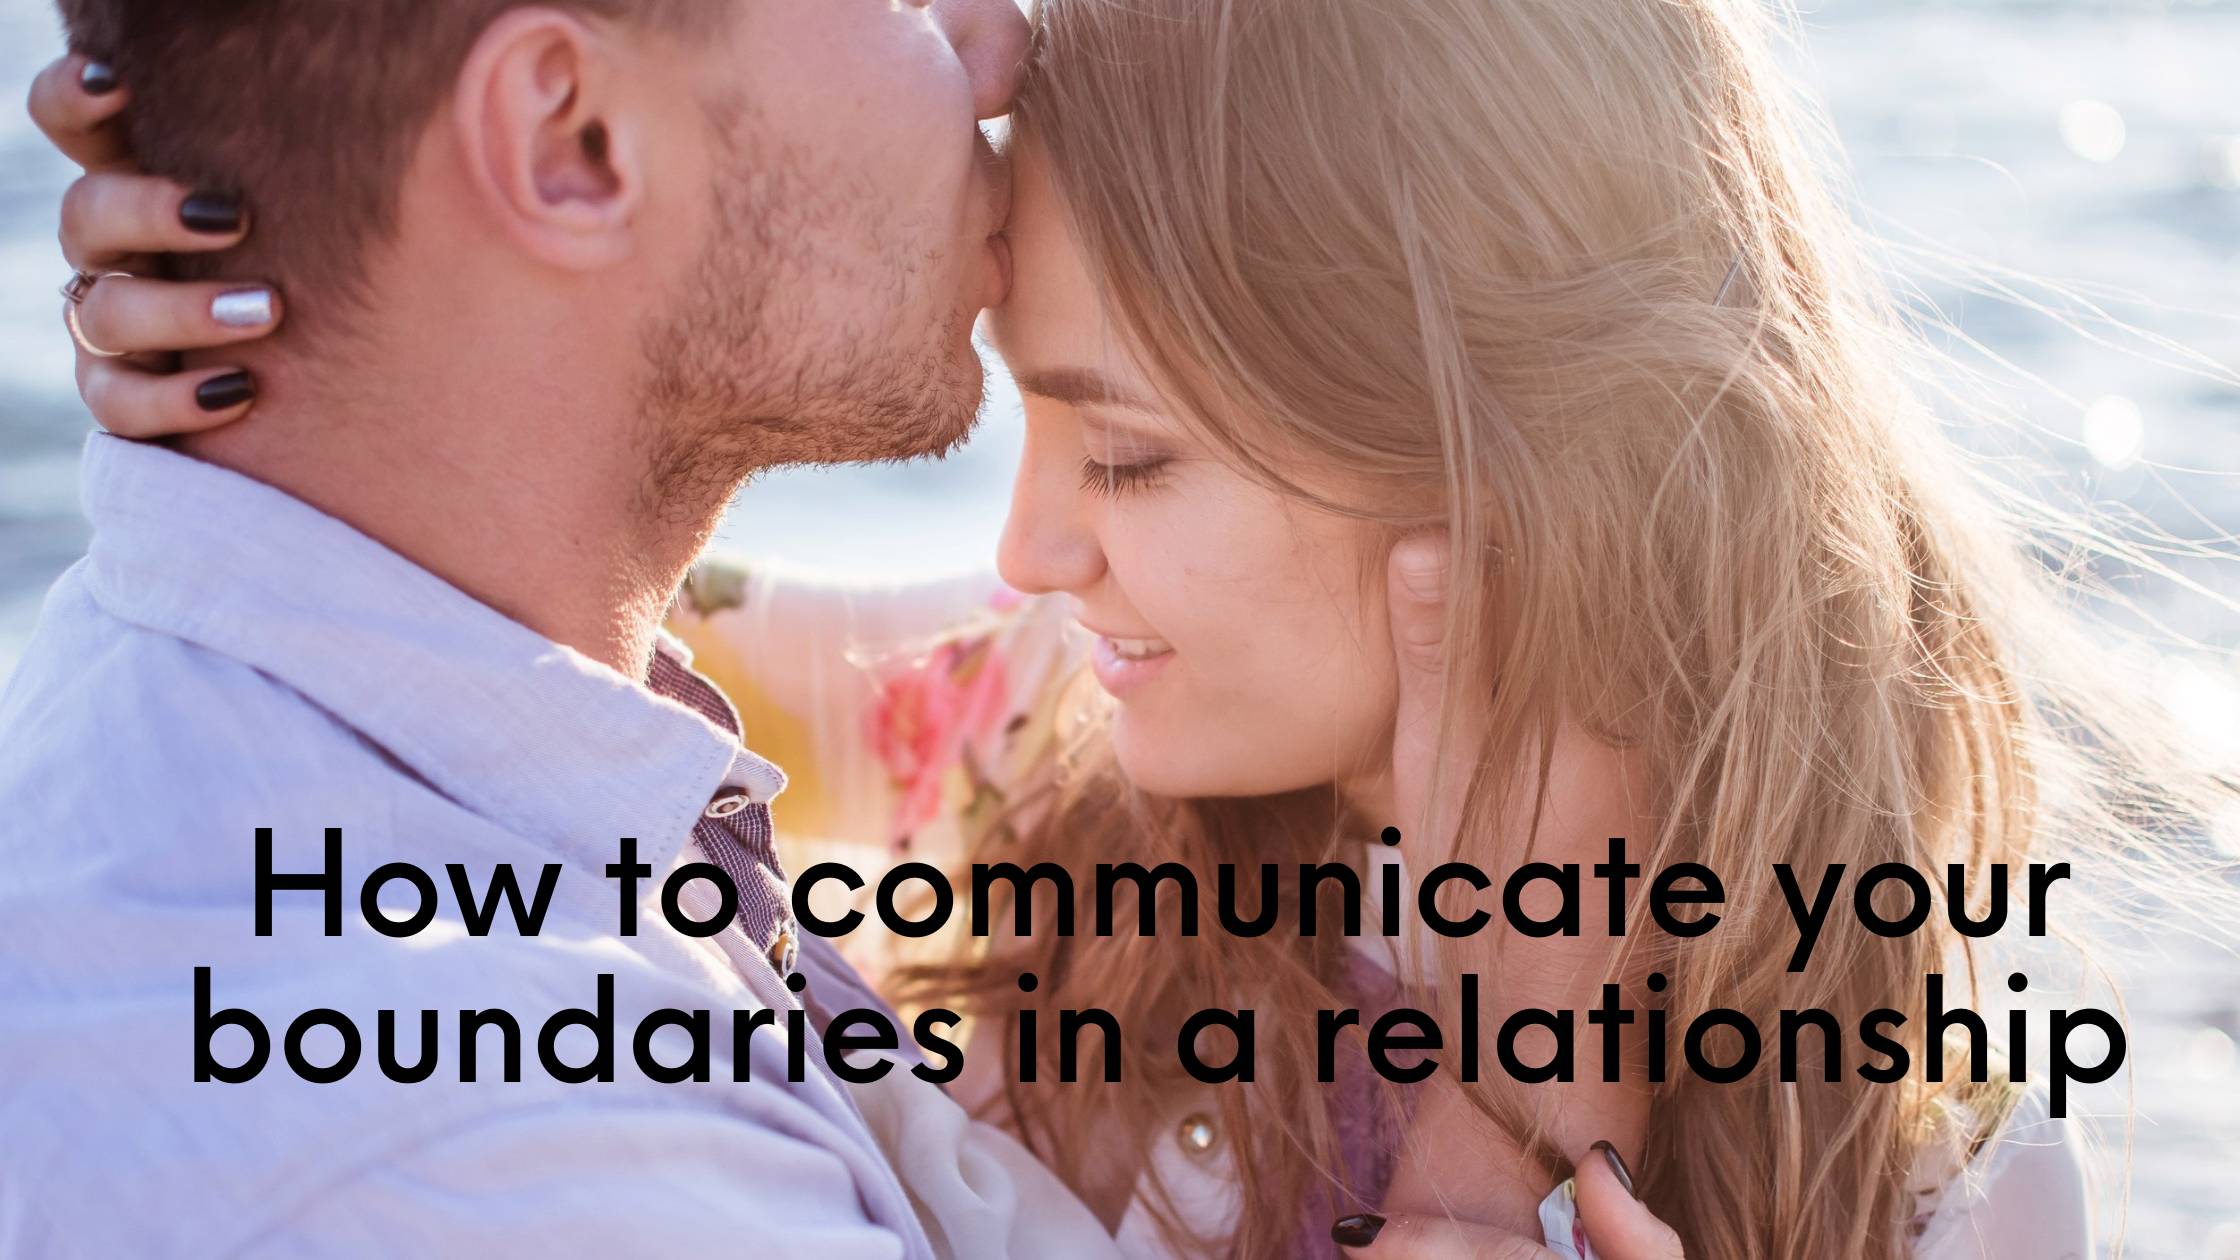 6 Smart Ways to Communicate Your Boundaries in a Relationship 41